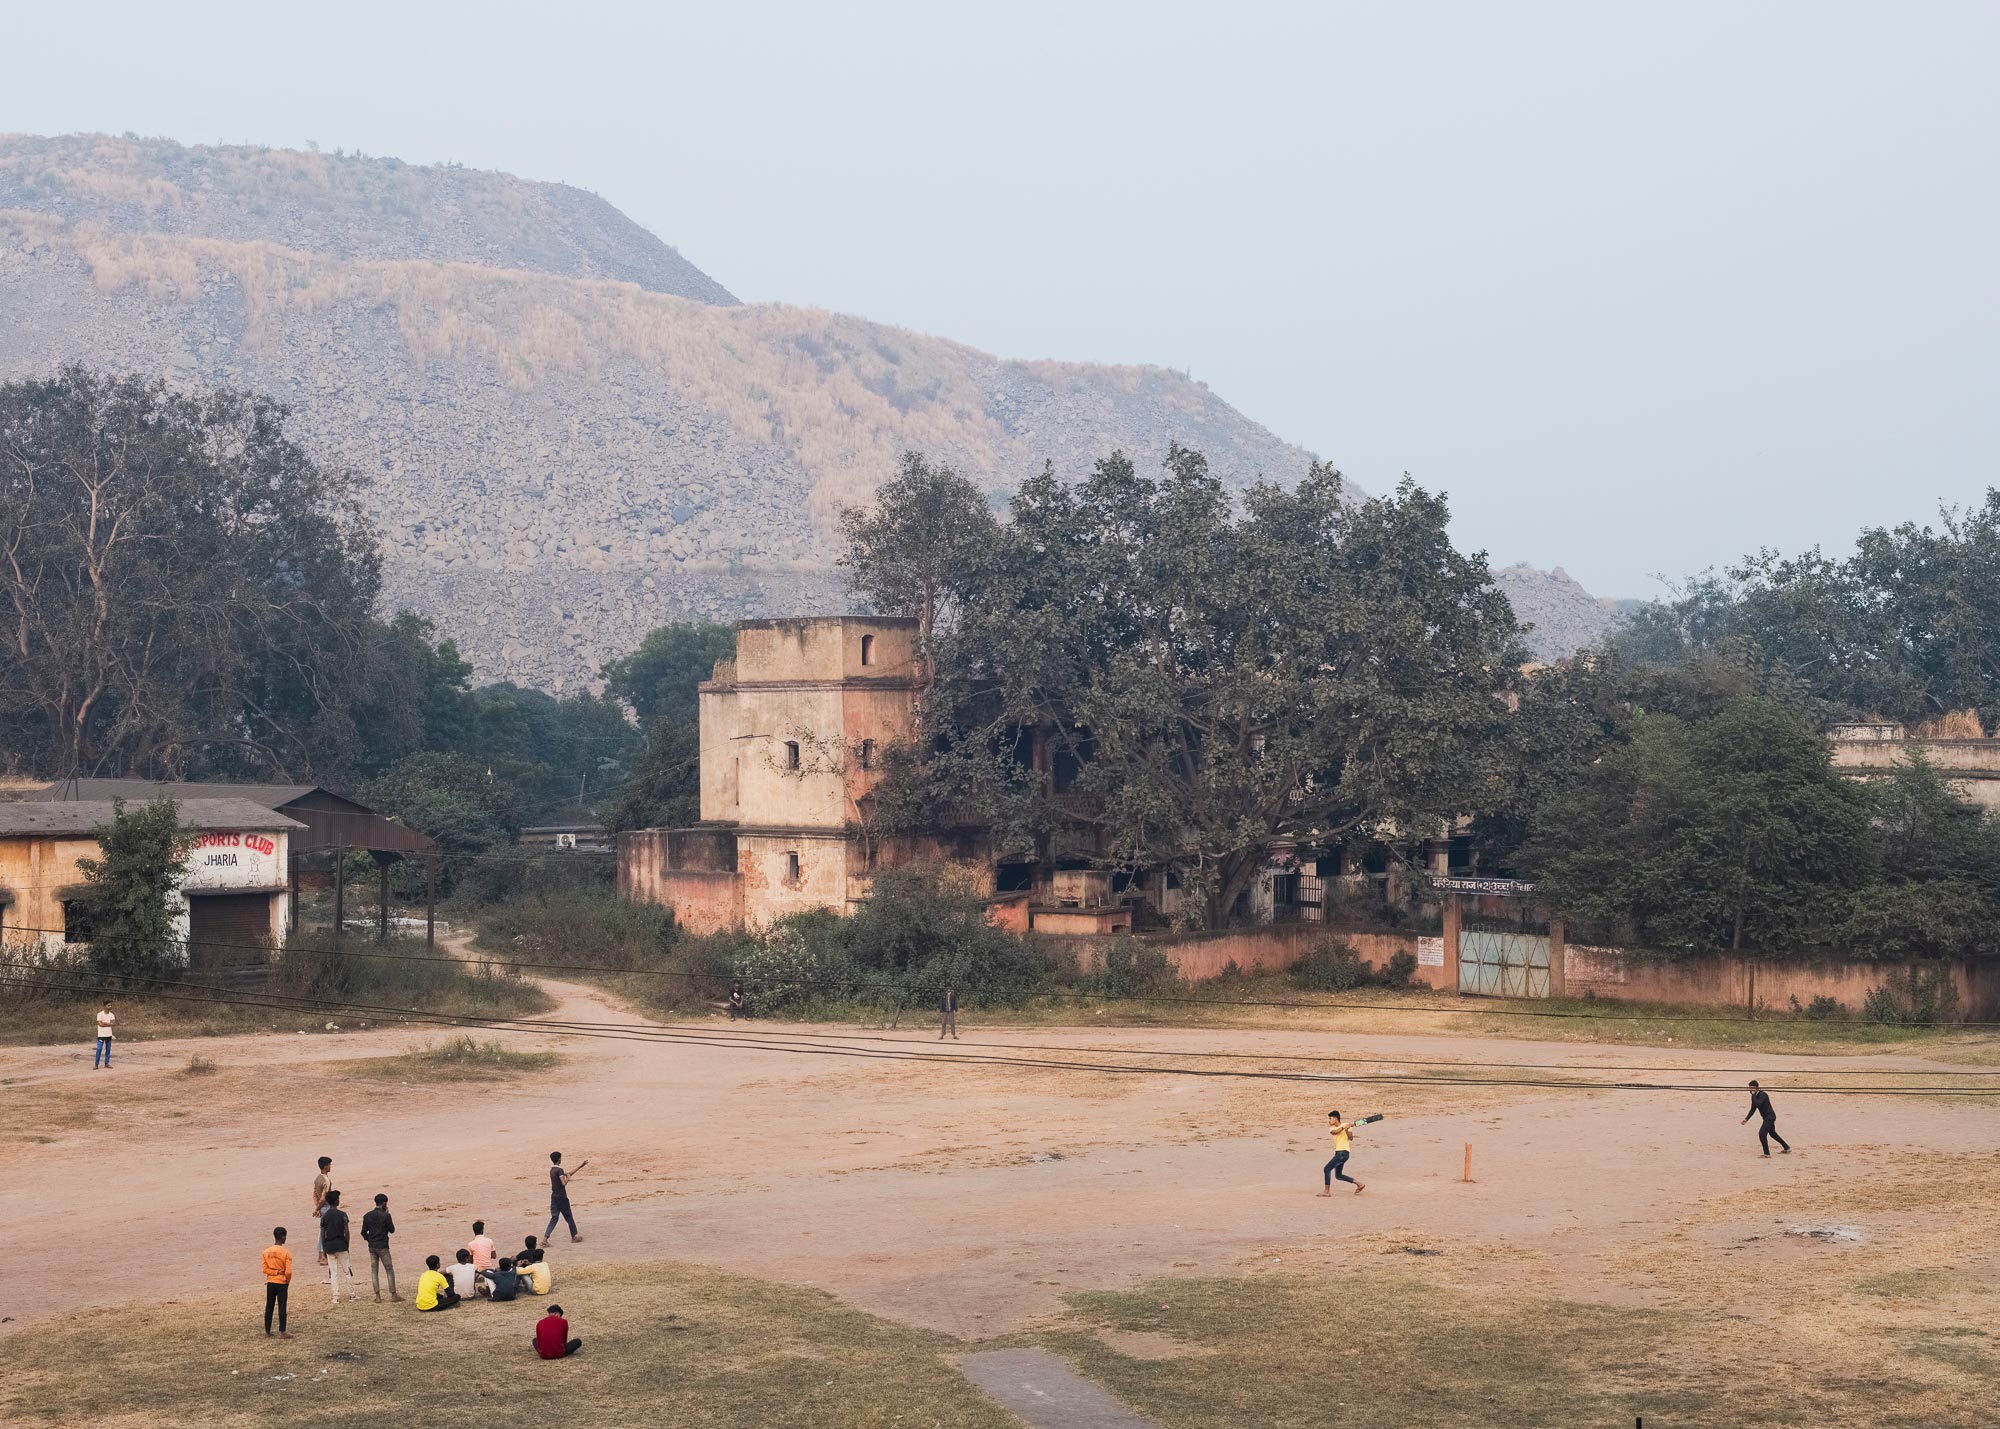 Local residents play a game of cricket outside of the Jharia coalfield in Dhanbad, in the state of Jharkhand, and home to India’s largest coal reserves. (Sarker Protick for TIME)